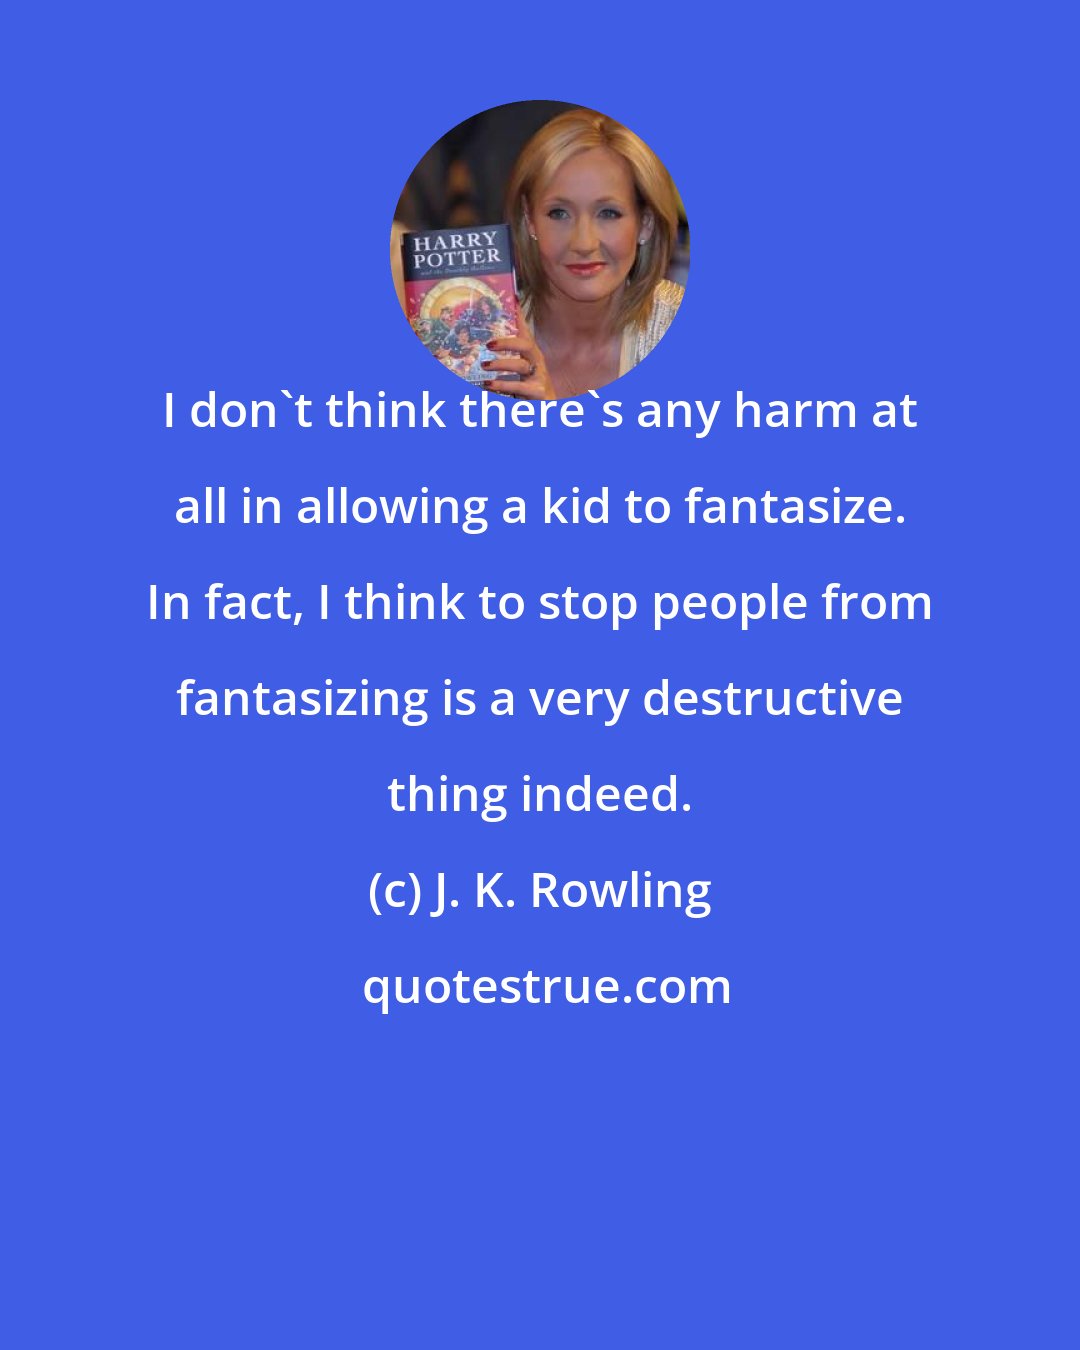 J. K. Rowling: I don't think there's any harm at all in allowing a kid to fantasize. In fact, I think to stop people from fantasizing is a very destructive thing indeed.